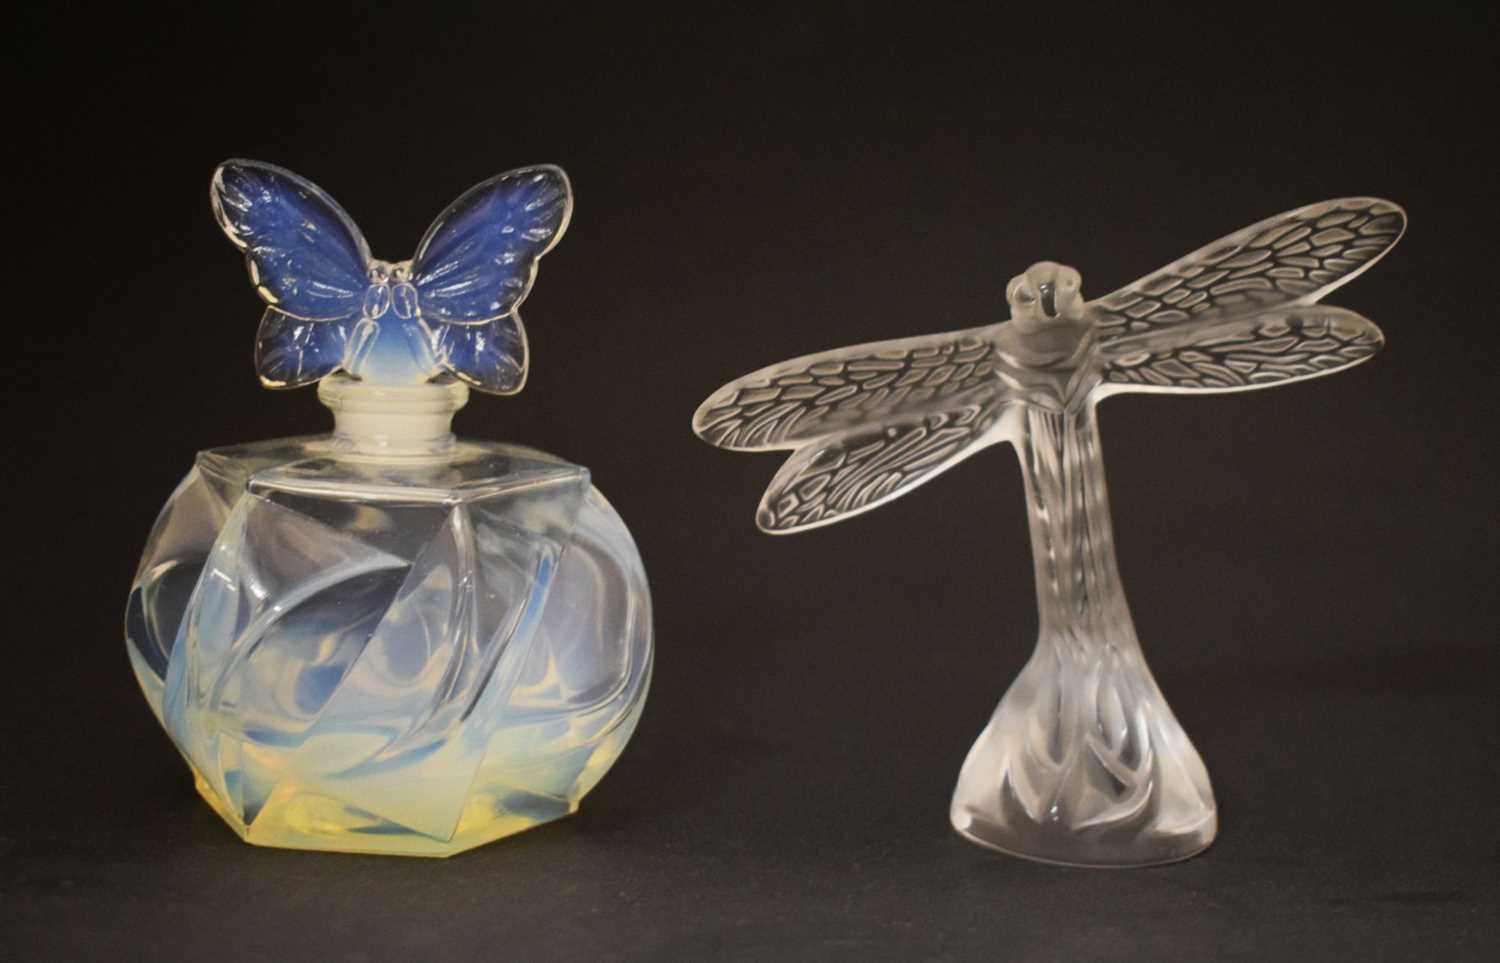 Lalique - Dragonfly paperweight, together with a Nina Ricci scent bottle